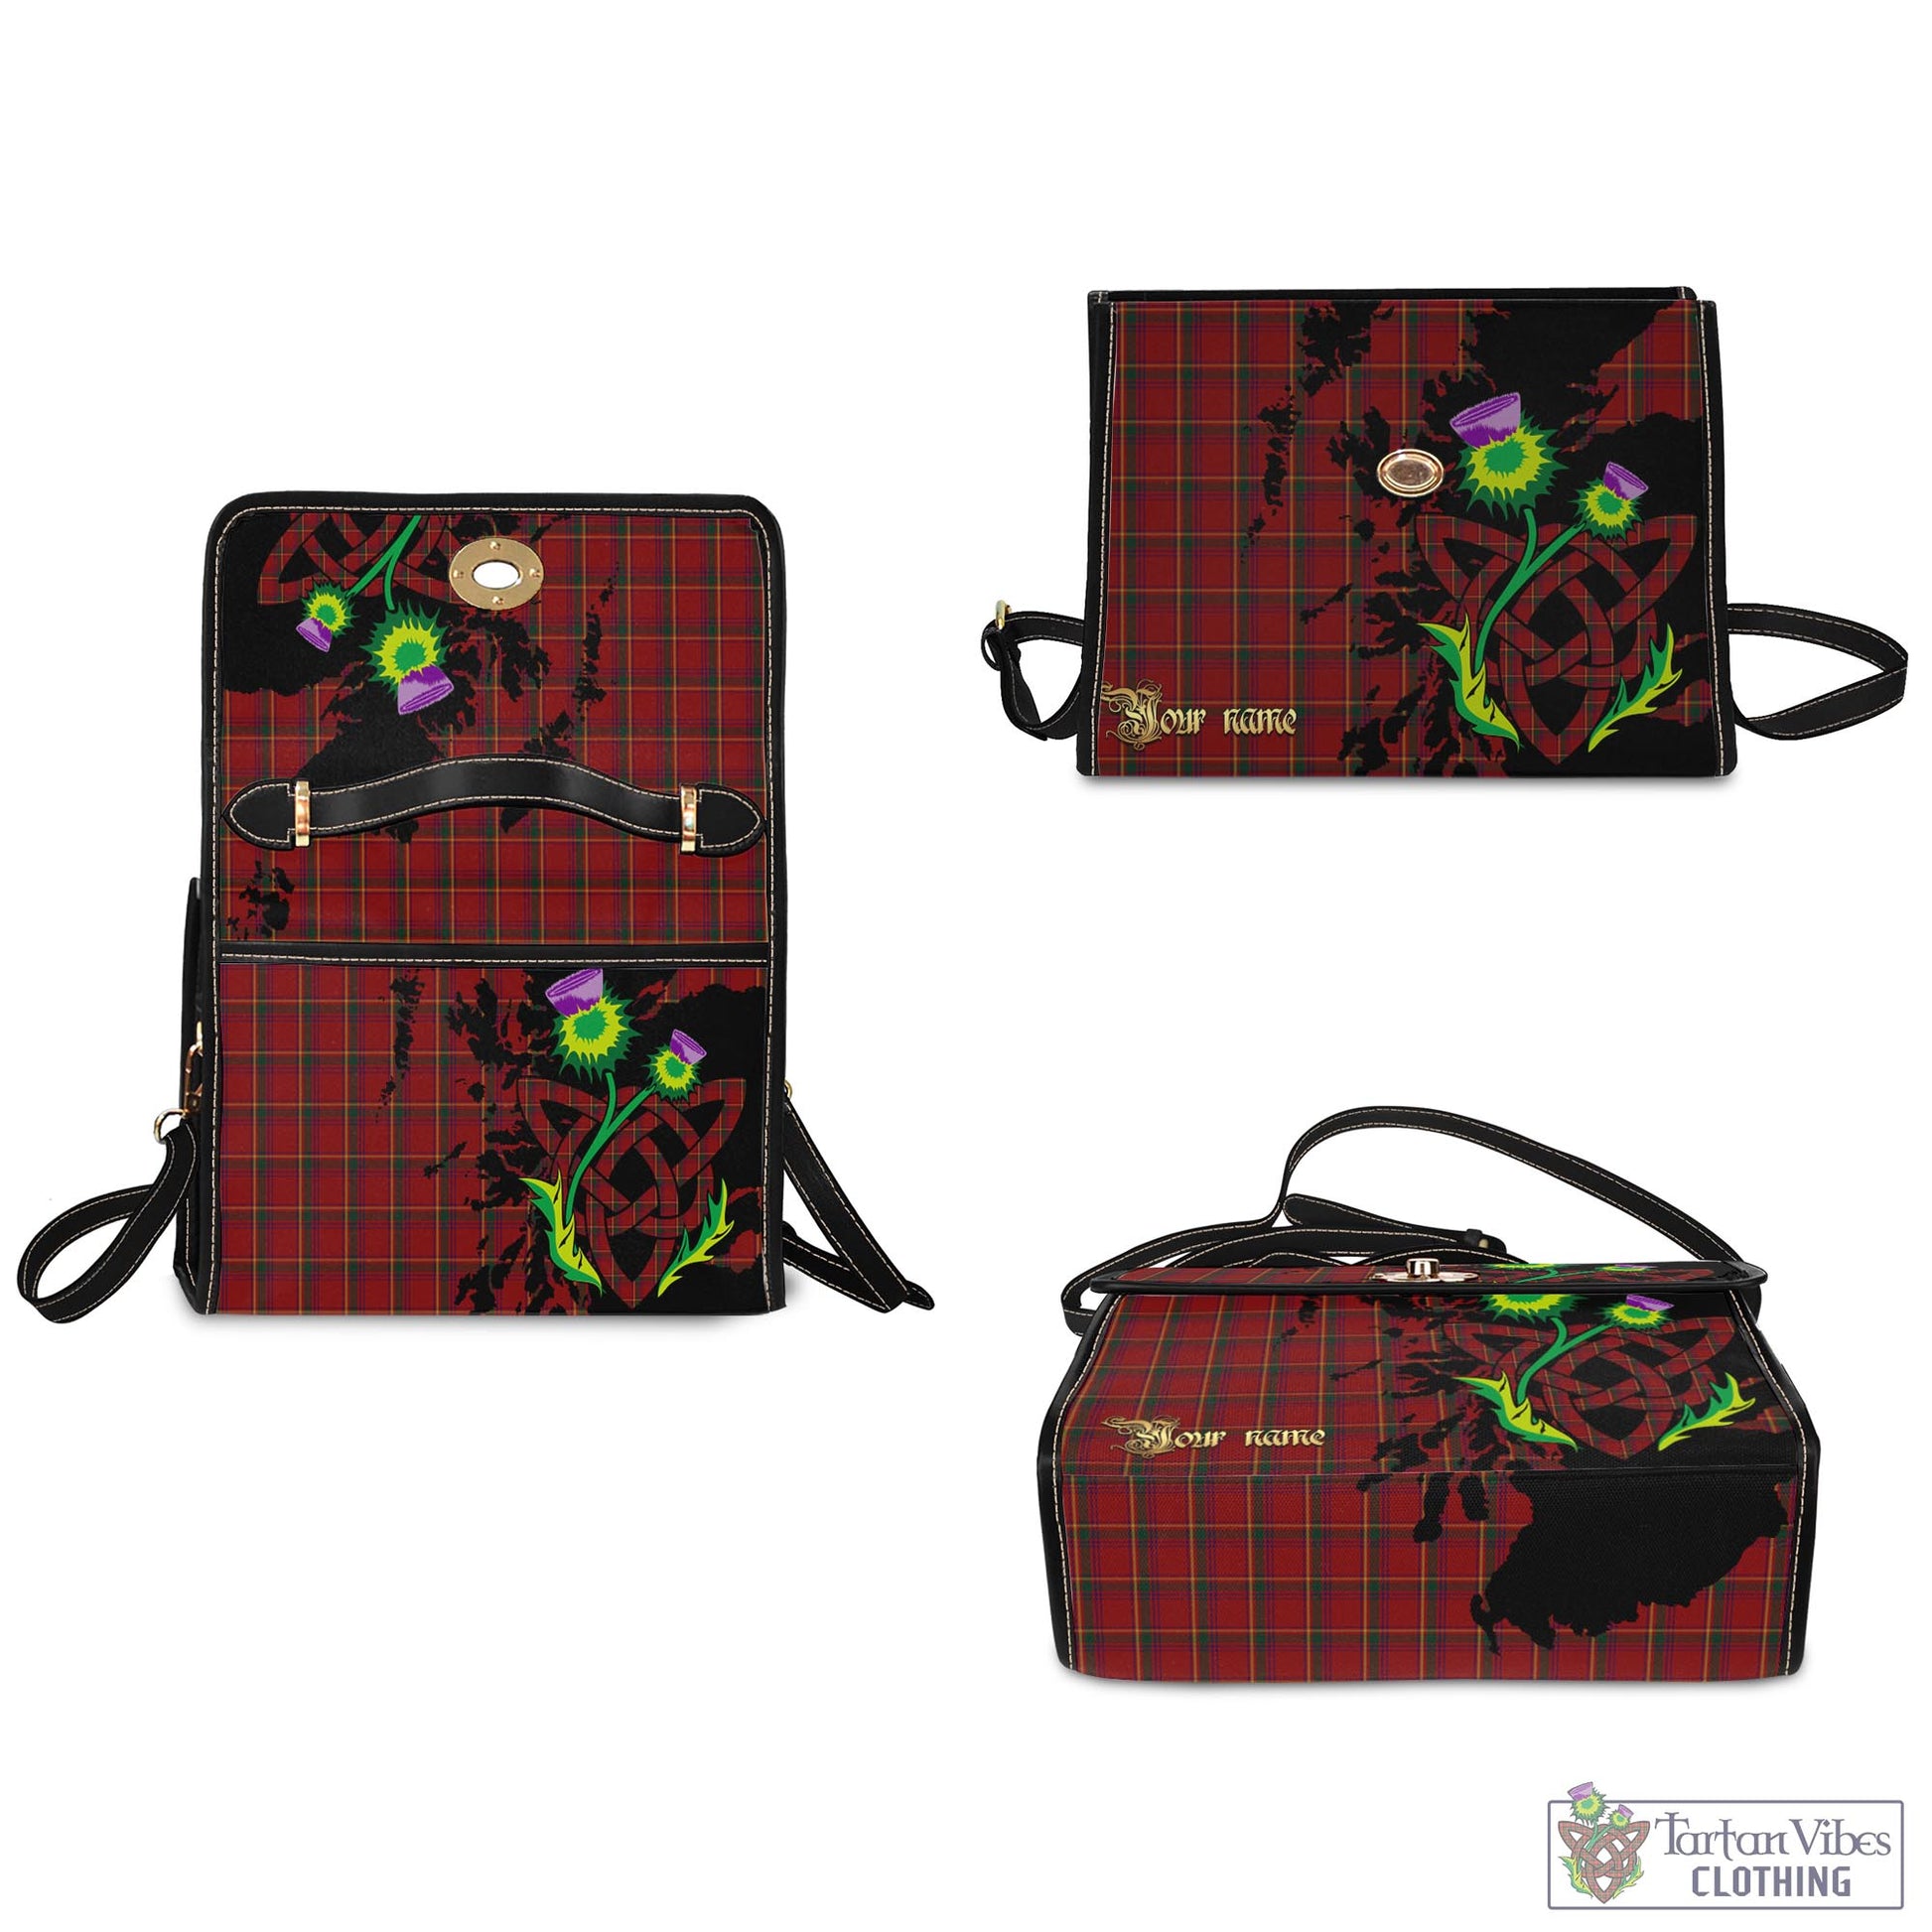 Tartan Vibes Clothing Galway County Ireland Tartan Waterproof Canvas Bag with Scotland Map and Thistle Celtic Accents